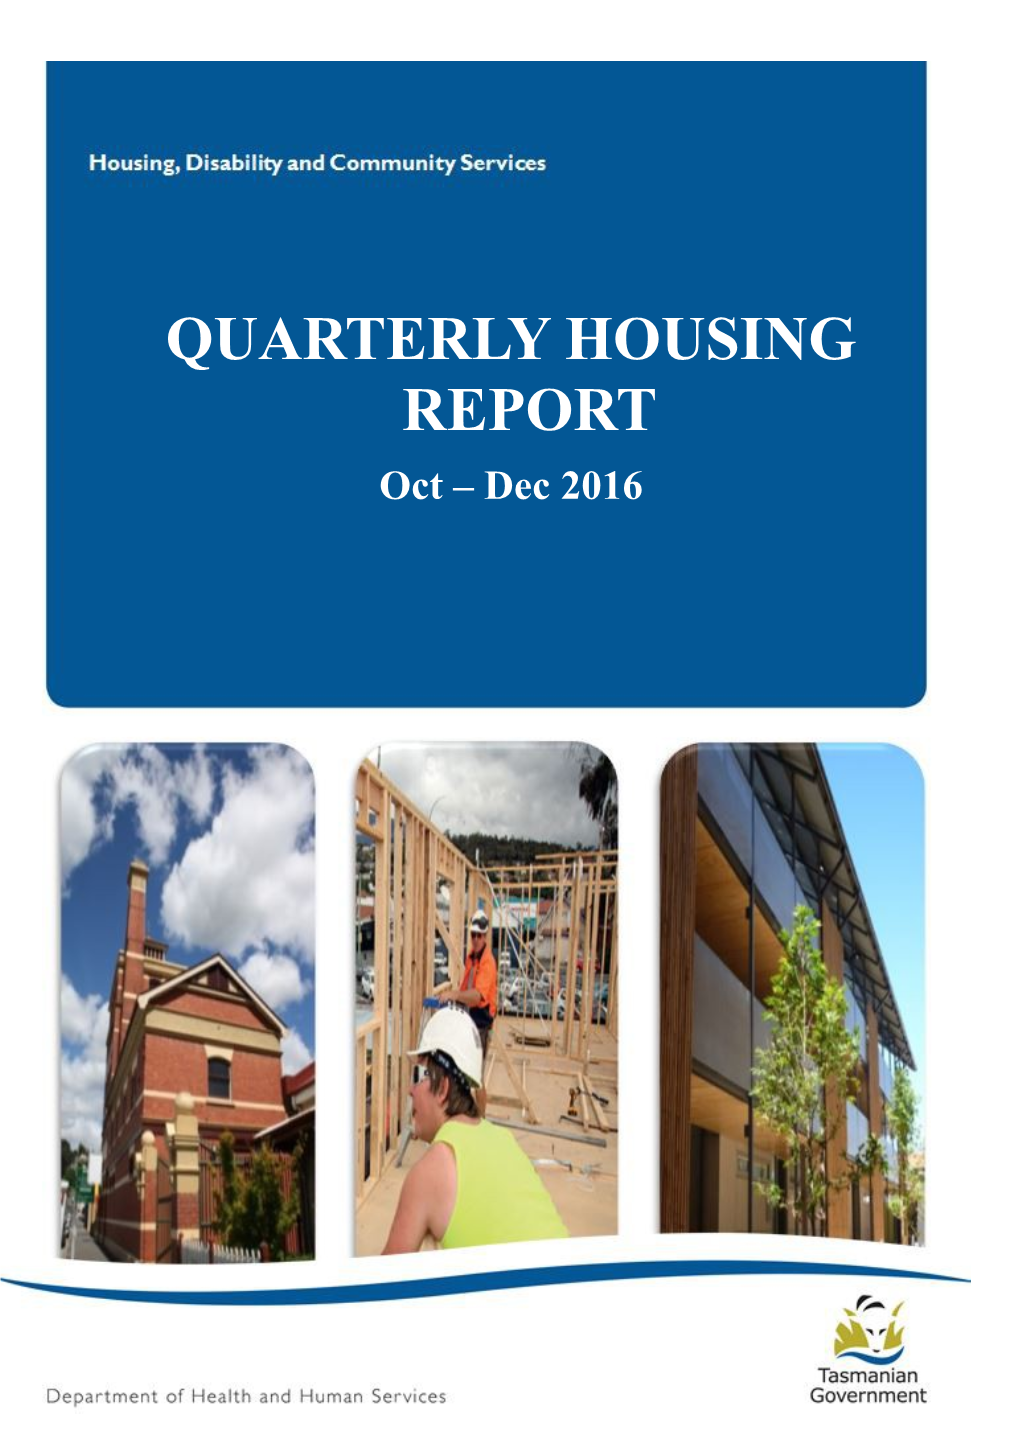 Housing, Disability and Community Services - Quarterly Housing Report, Oct - Dec 2016